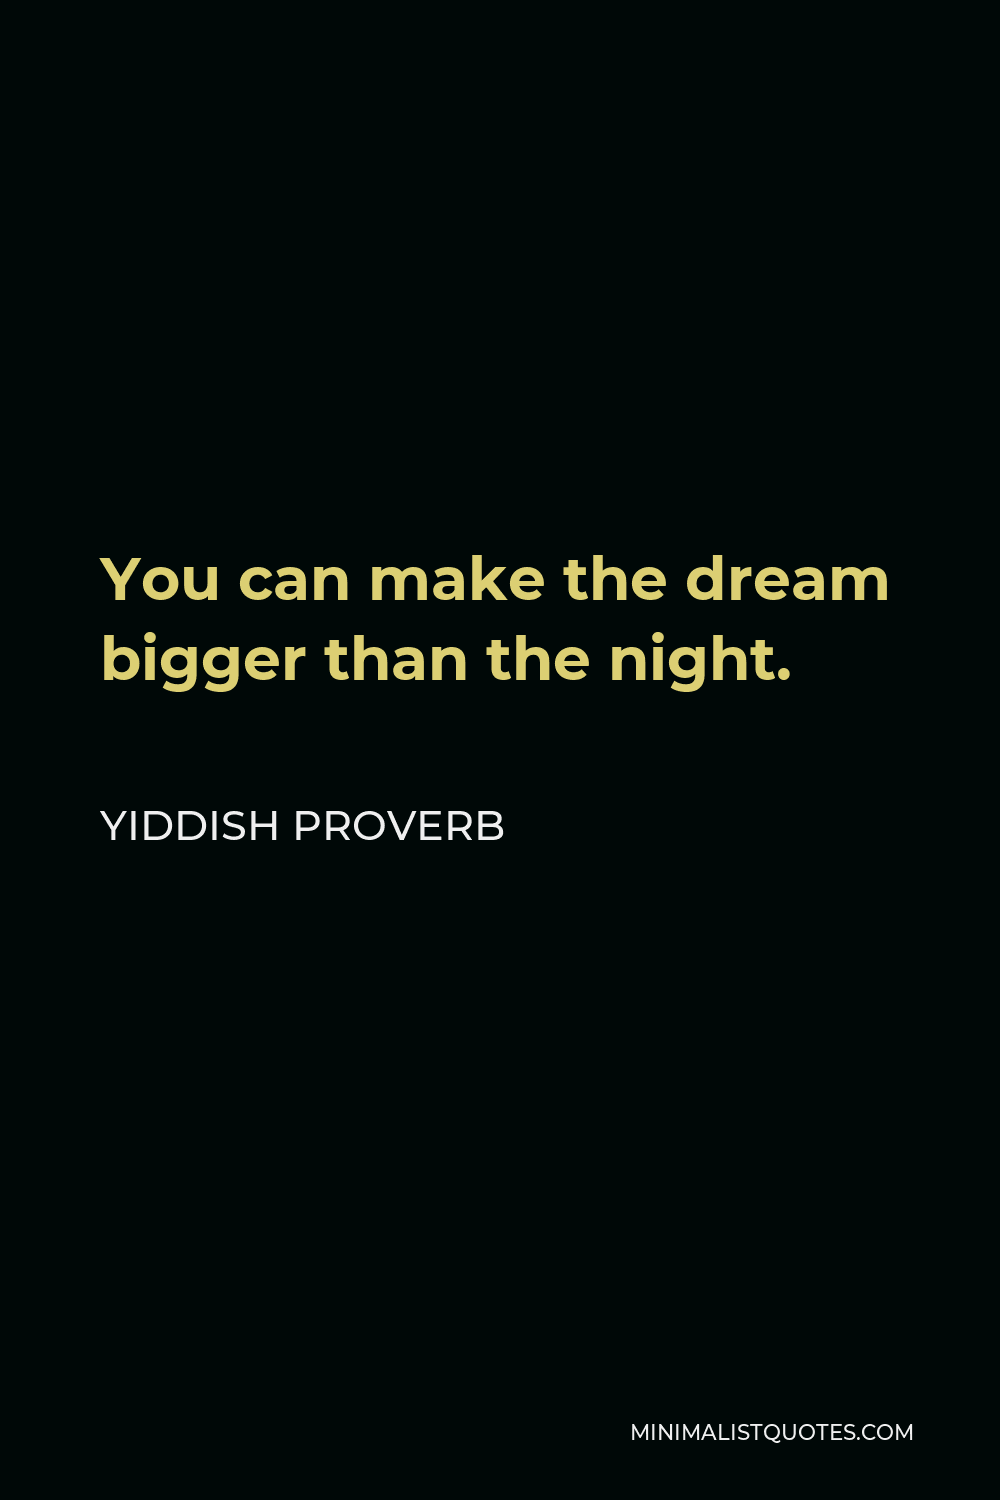 Yiddish Proverb Quote - You can make the dream bigger than the night.